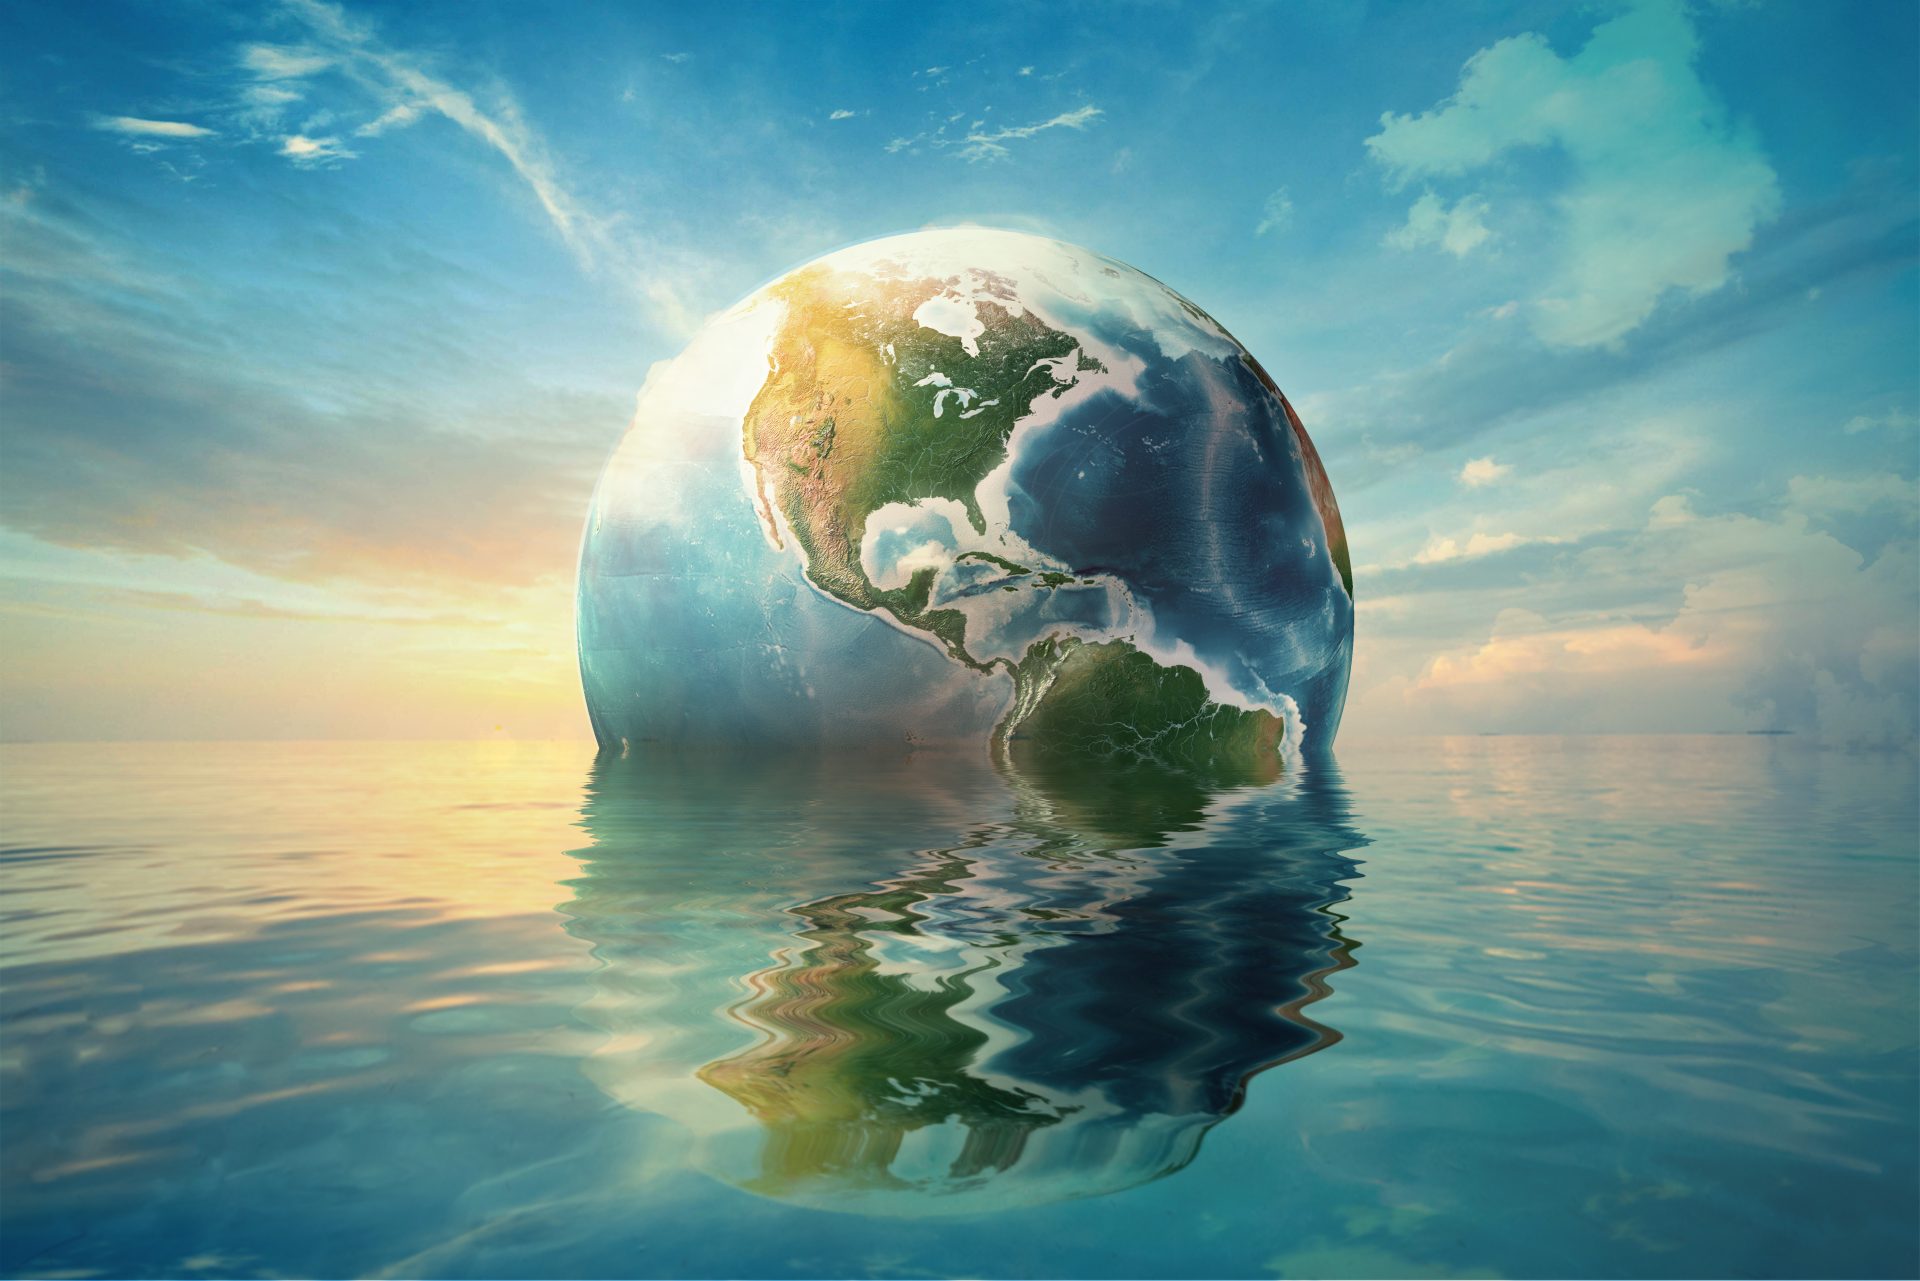 Digital illustration of the Earth floating in water. A sun ray lighting the glob from behind